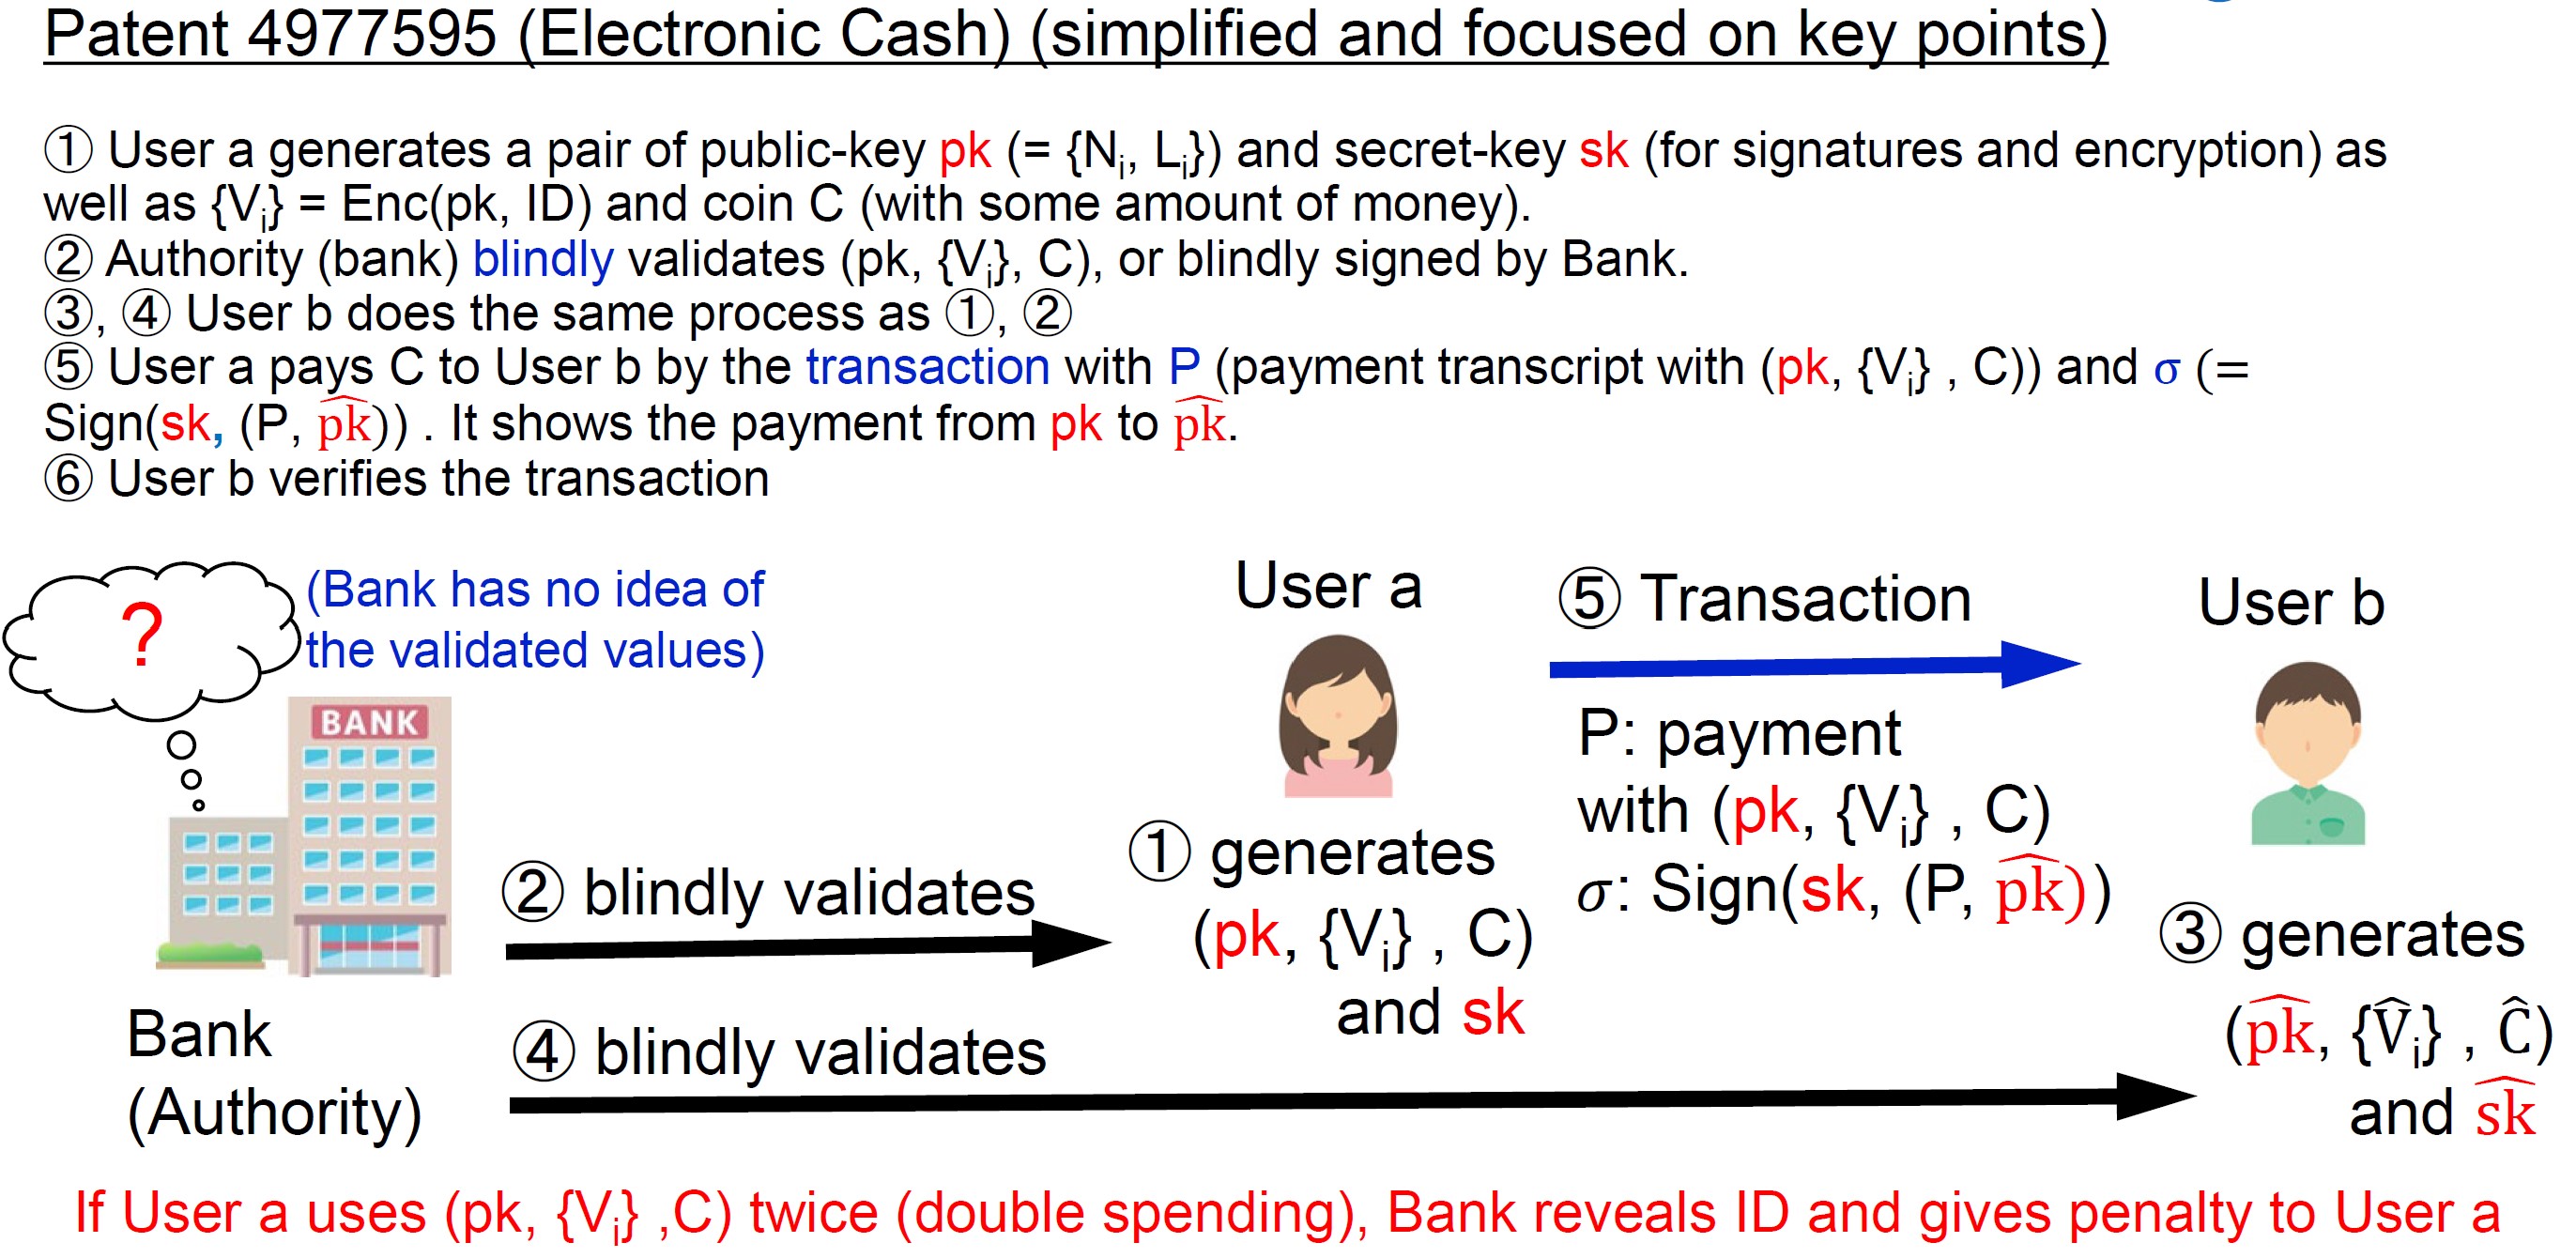 Diagram: Electronic Cash described in Patent 49775595. Source: NTT Research